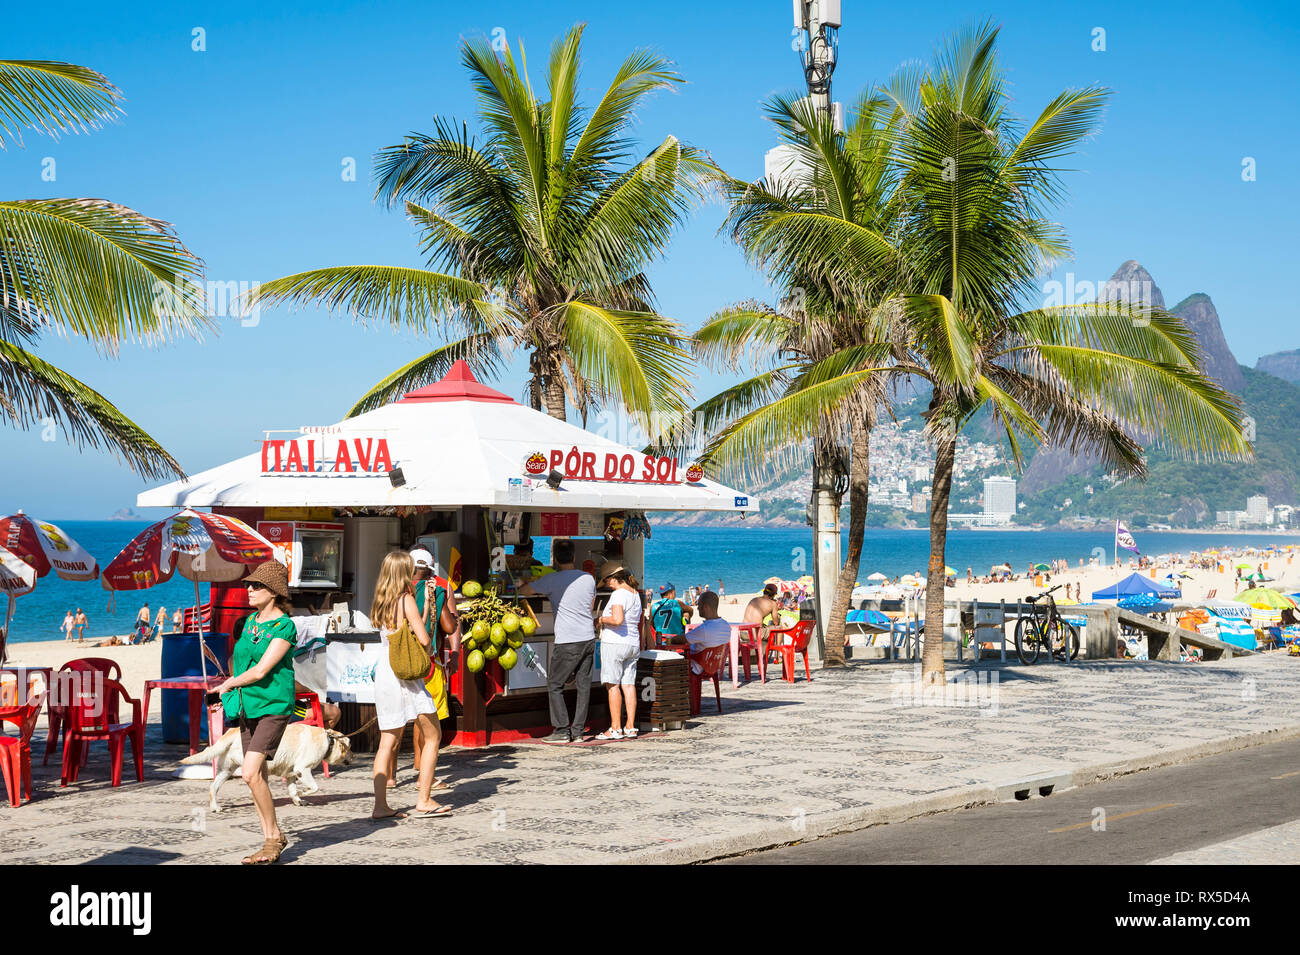 RIO DE JANEIRO - FEBRUARY 19, 2017: Customers stand at a kiosk selling drinks and coconuts at the Arpoador end of Ipanema Beach. Stock Photo